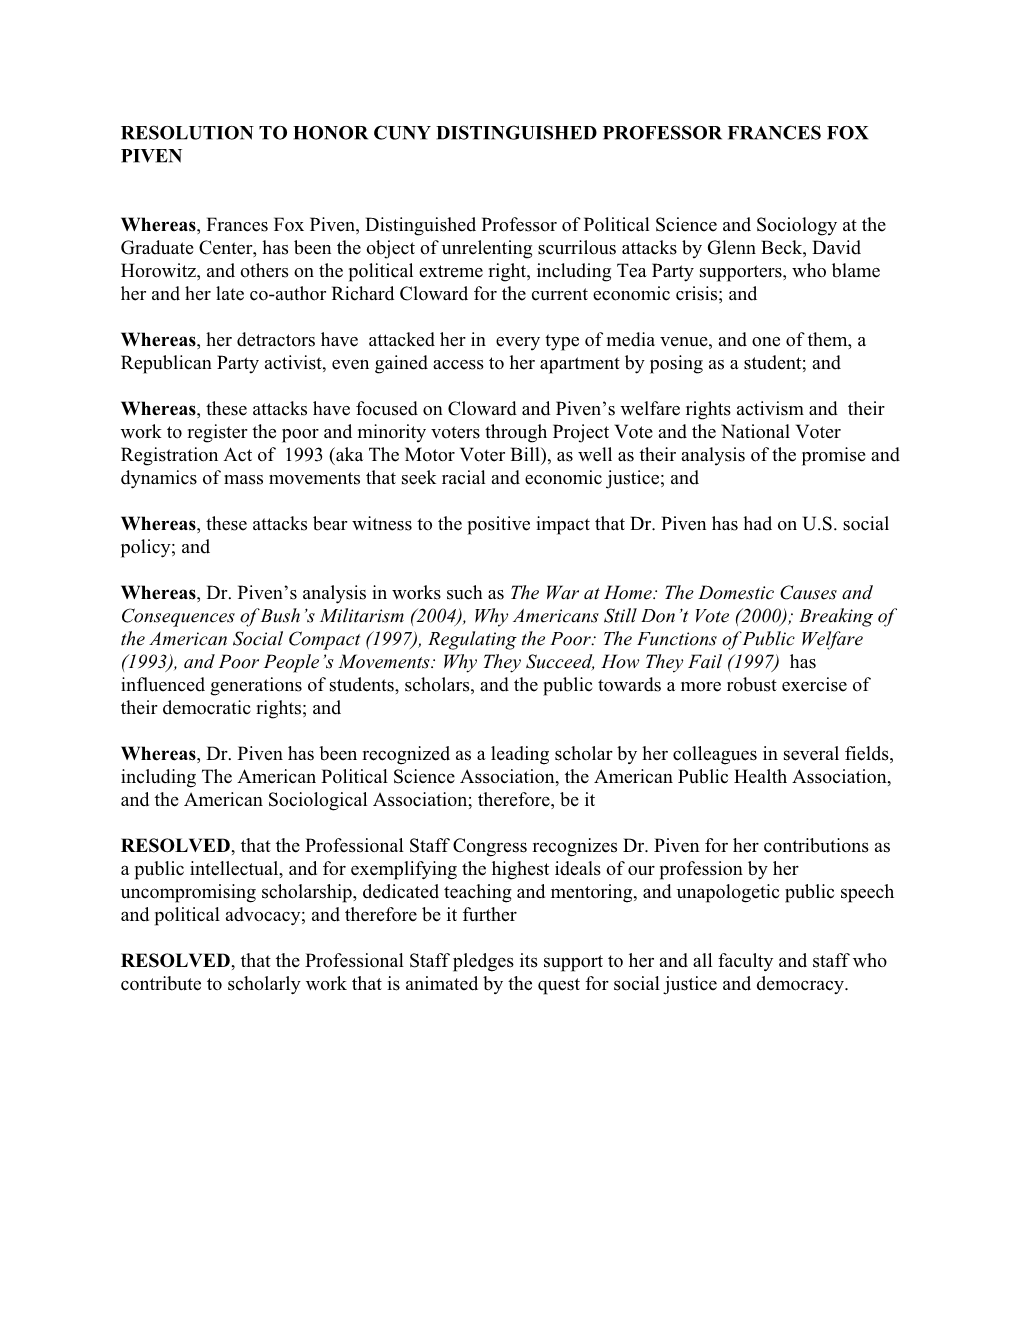 Resolution to Honor Cuny Distinguished Professor Frances Fox Piven